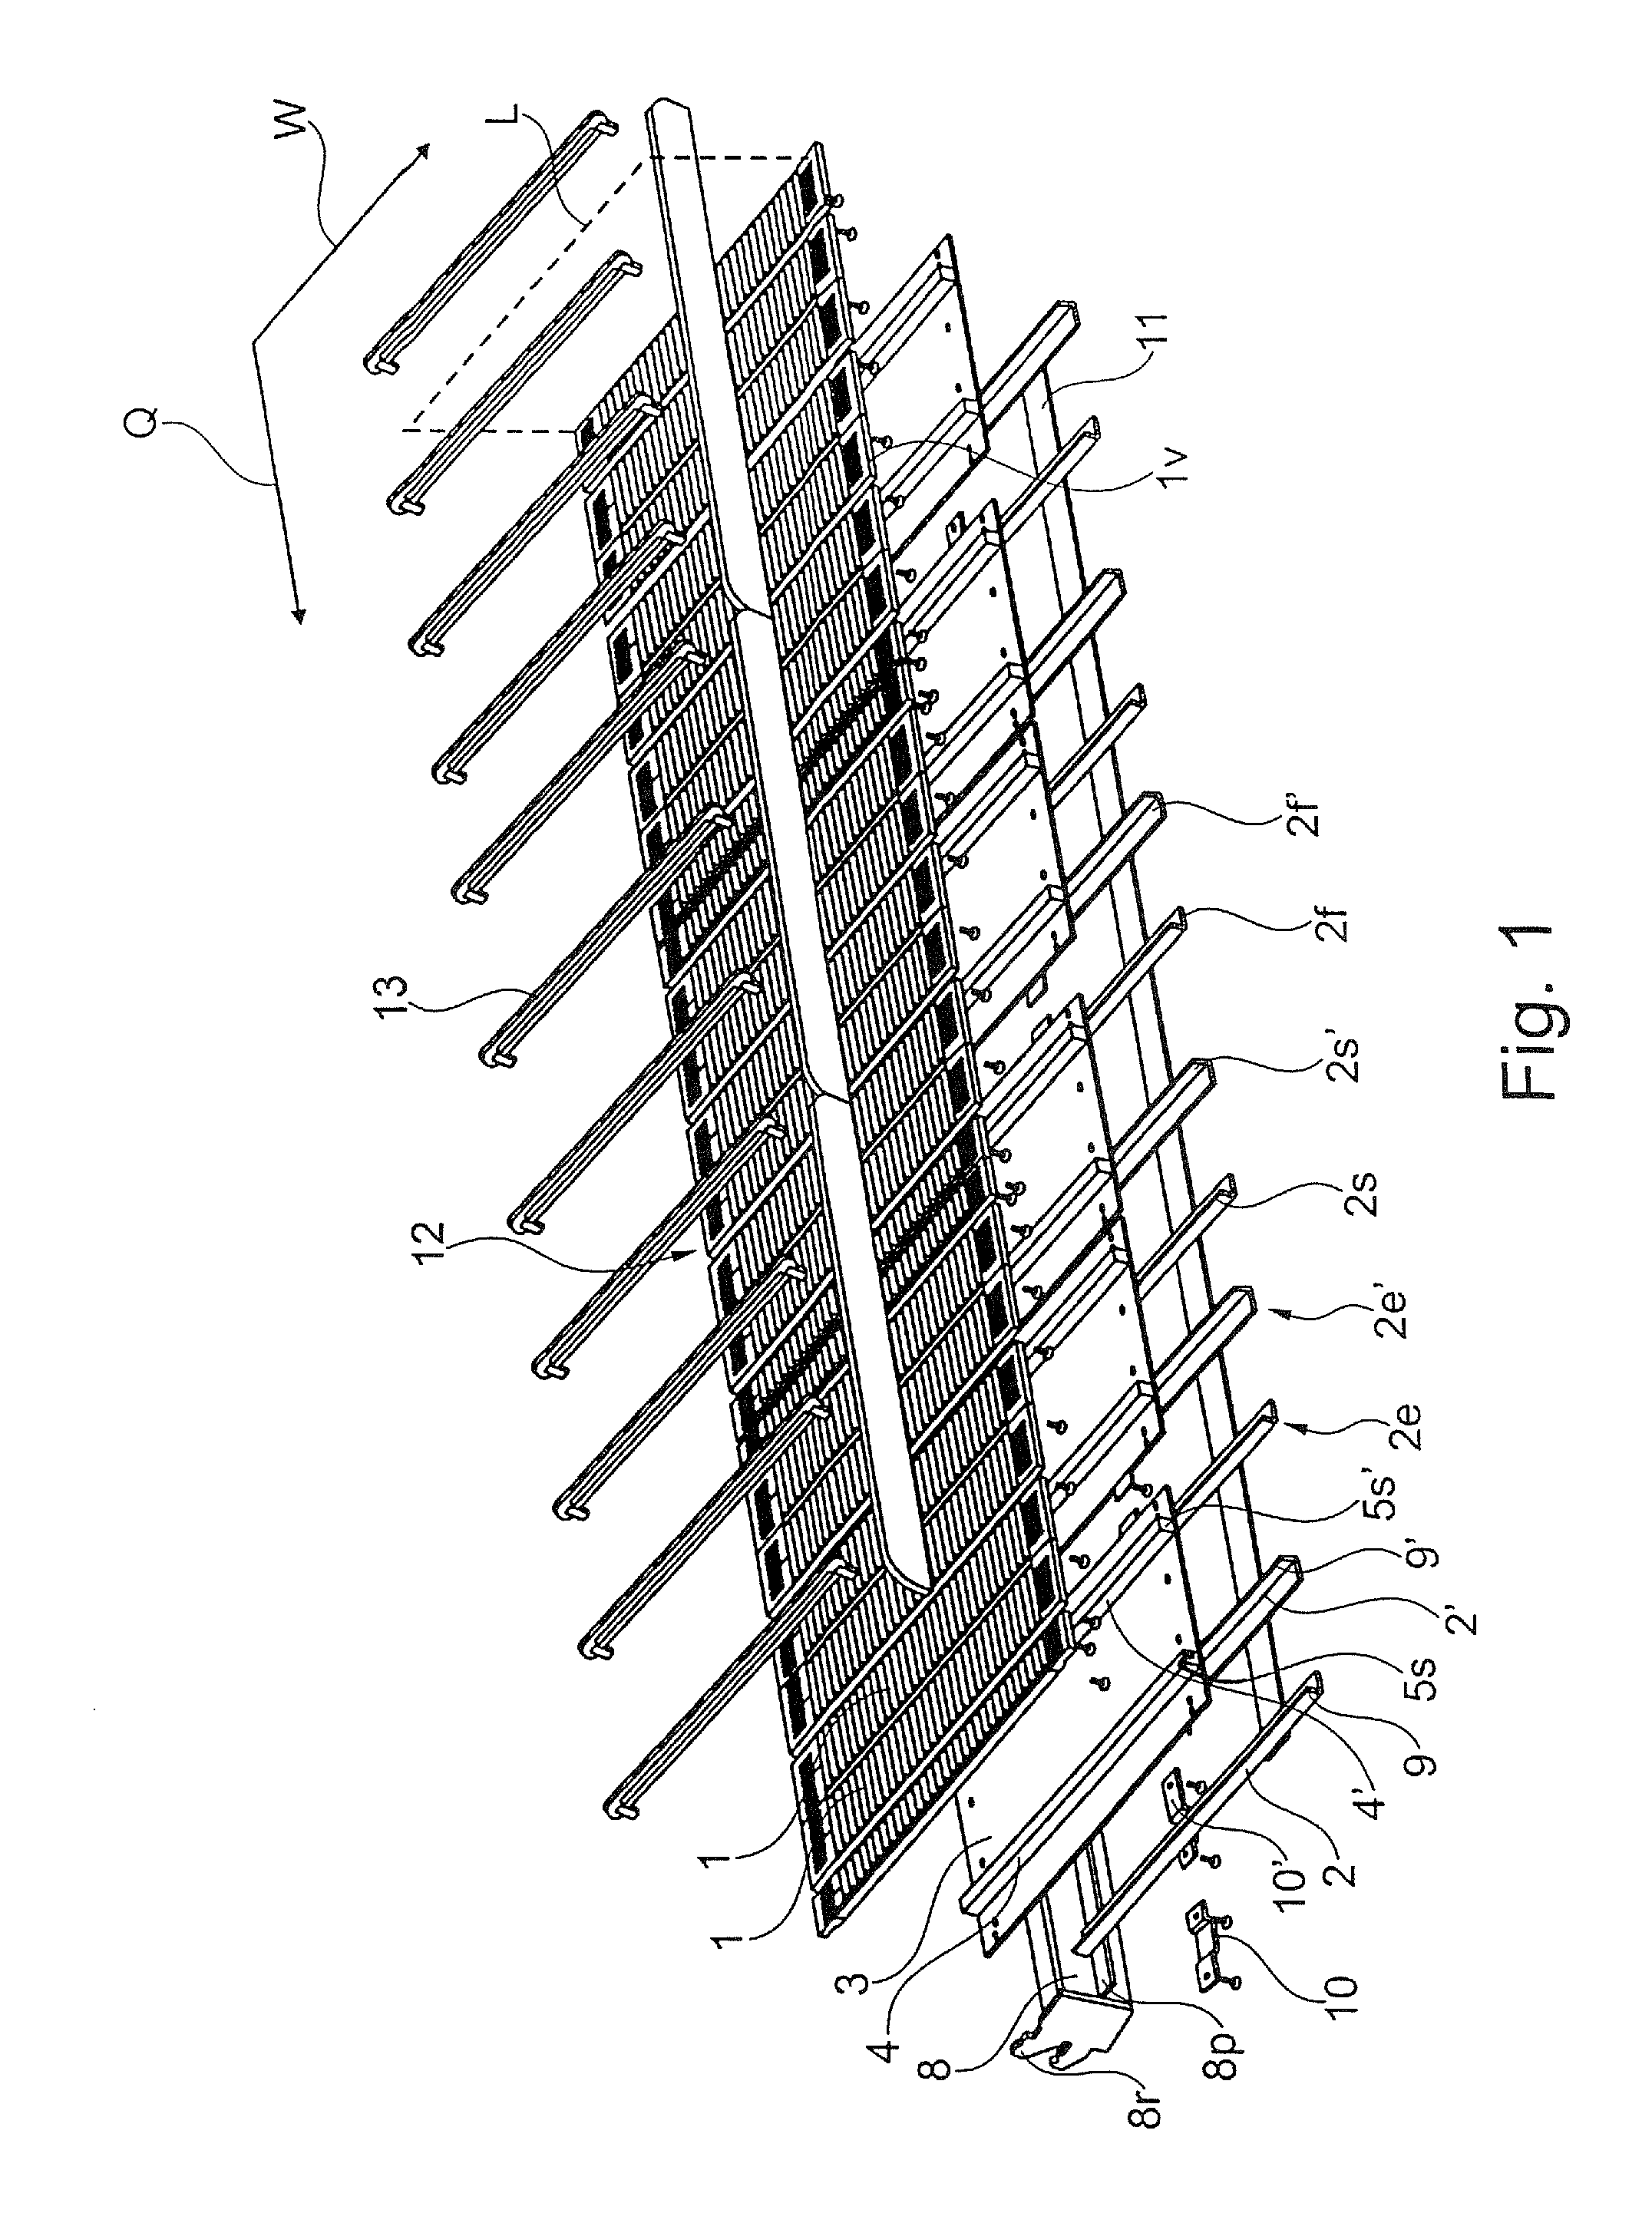 Goods feeding system for receiving and presenting goods